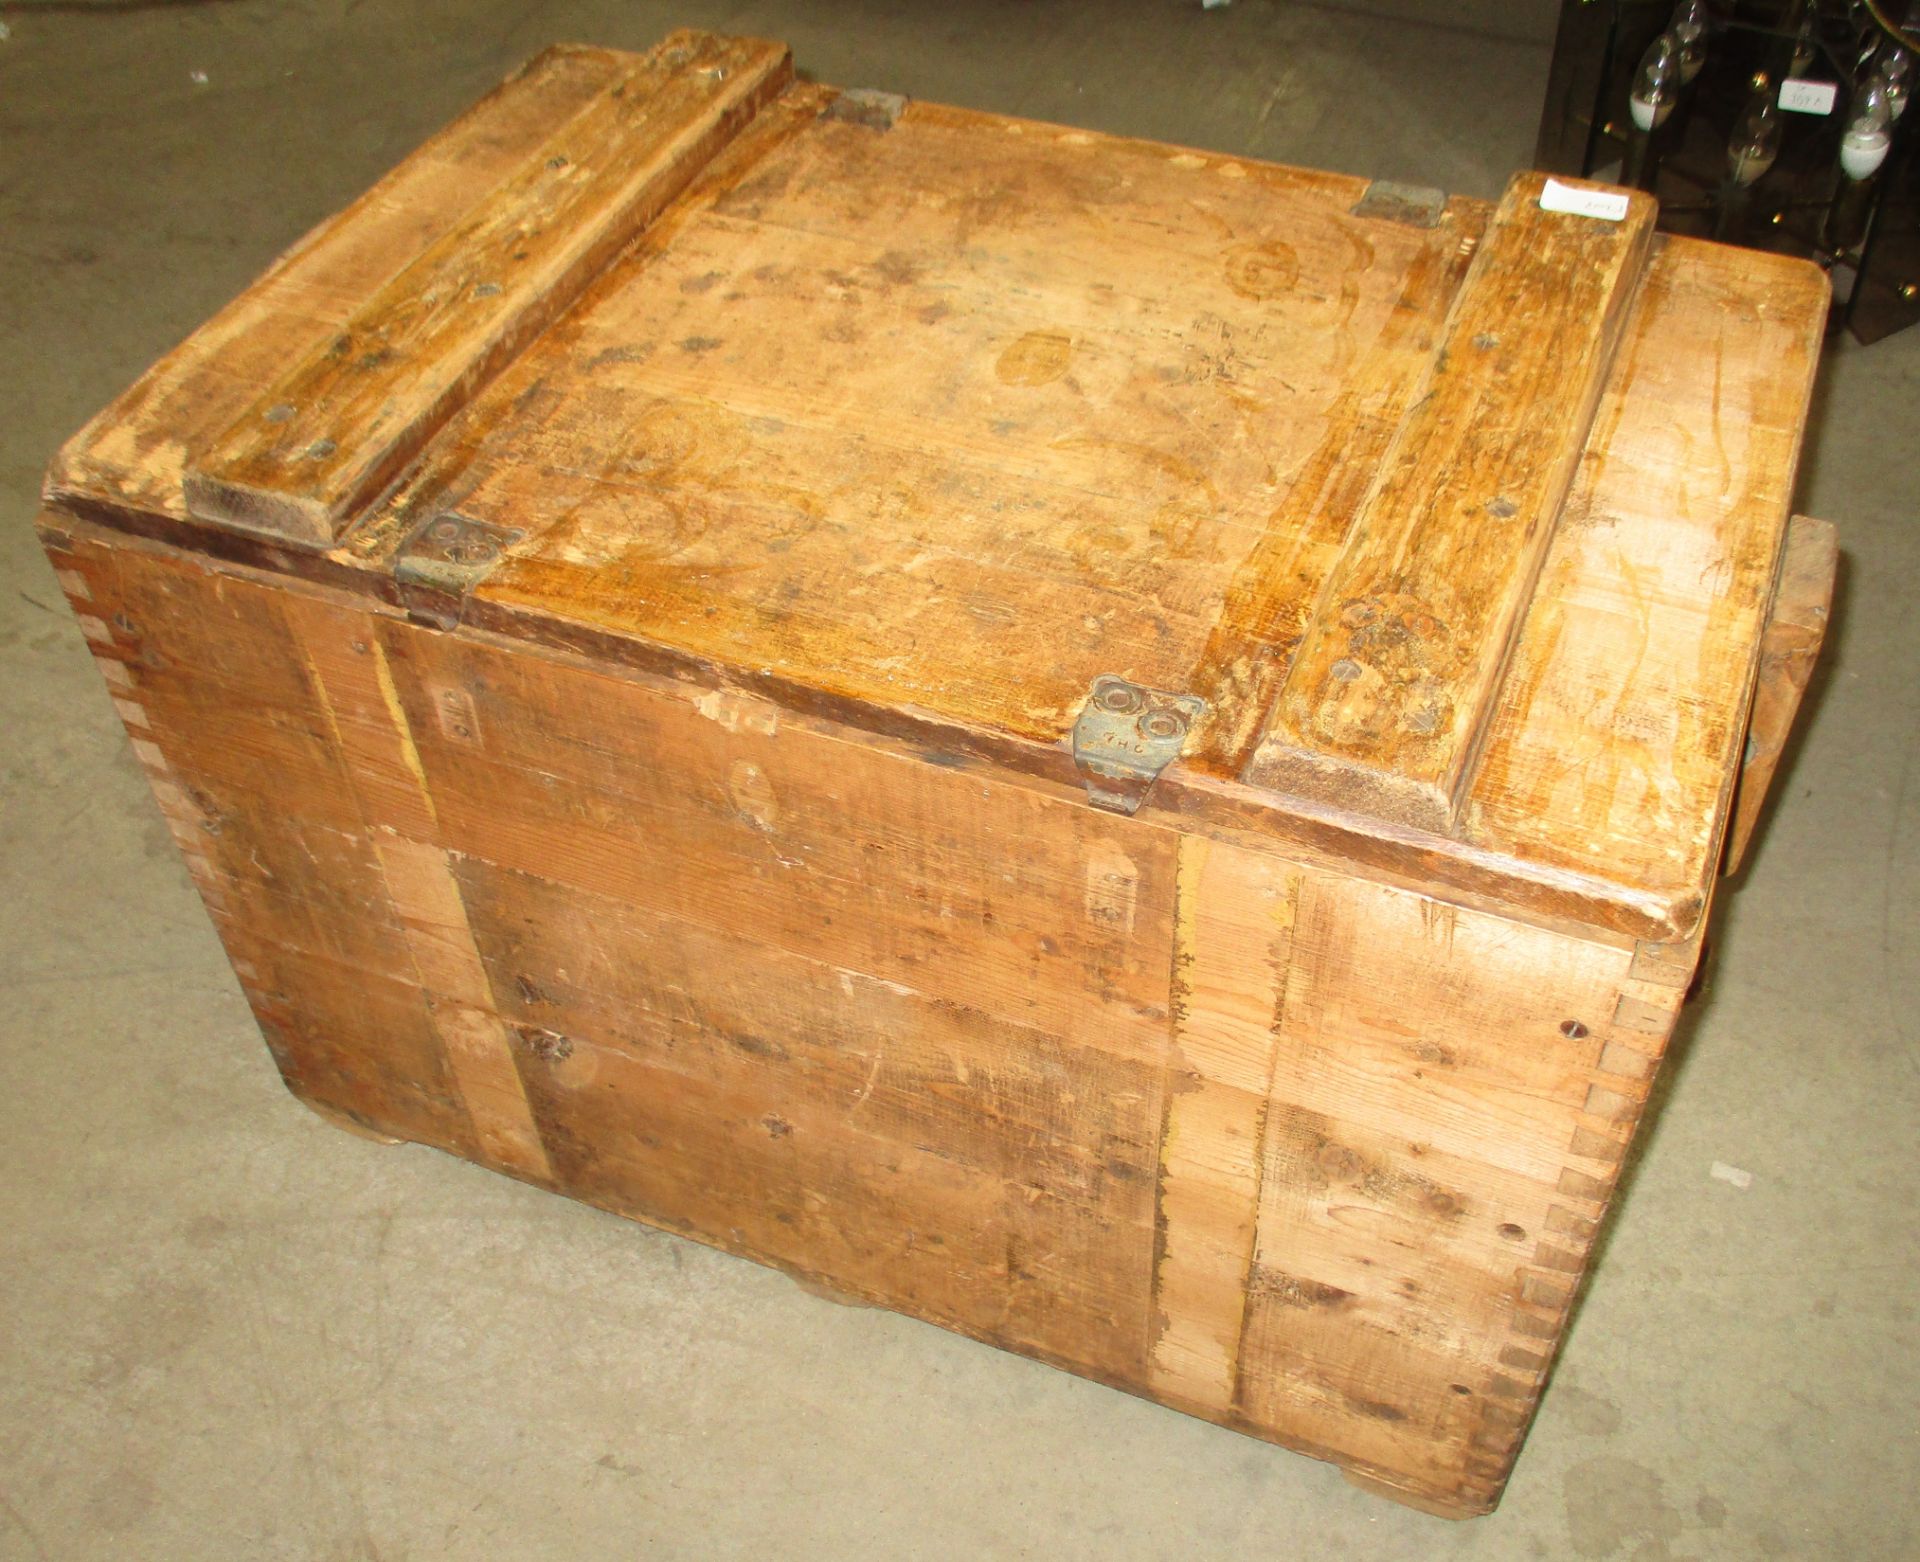 A wooden crate with lift top lid